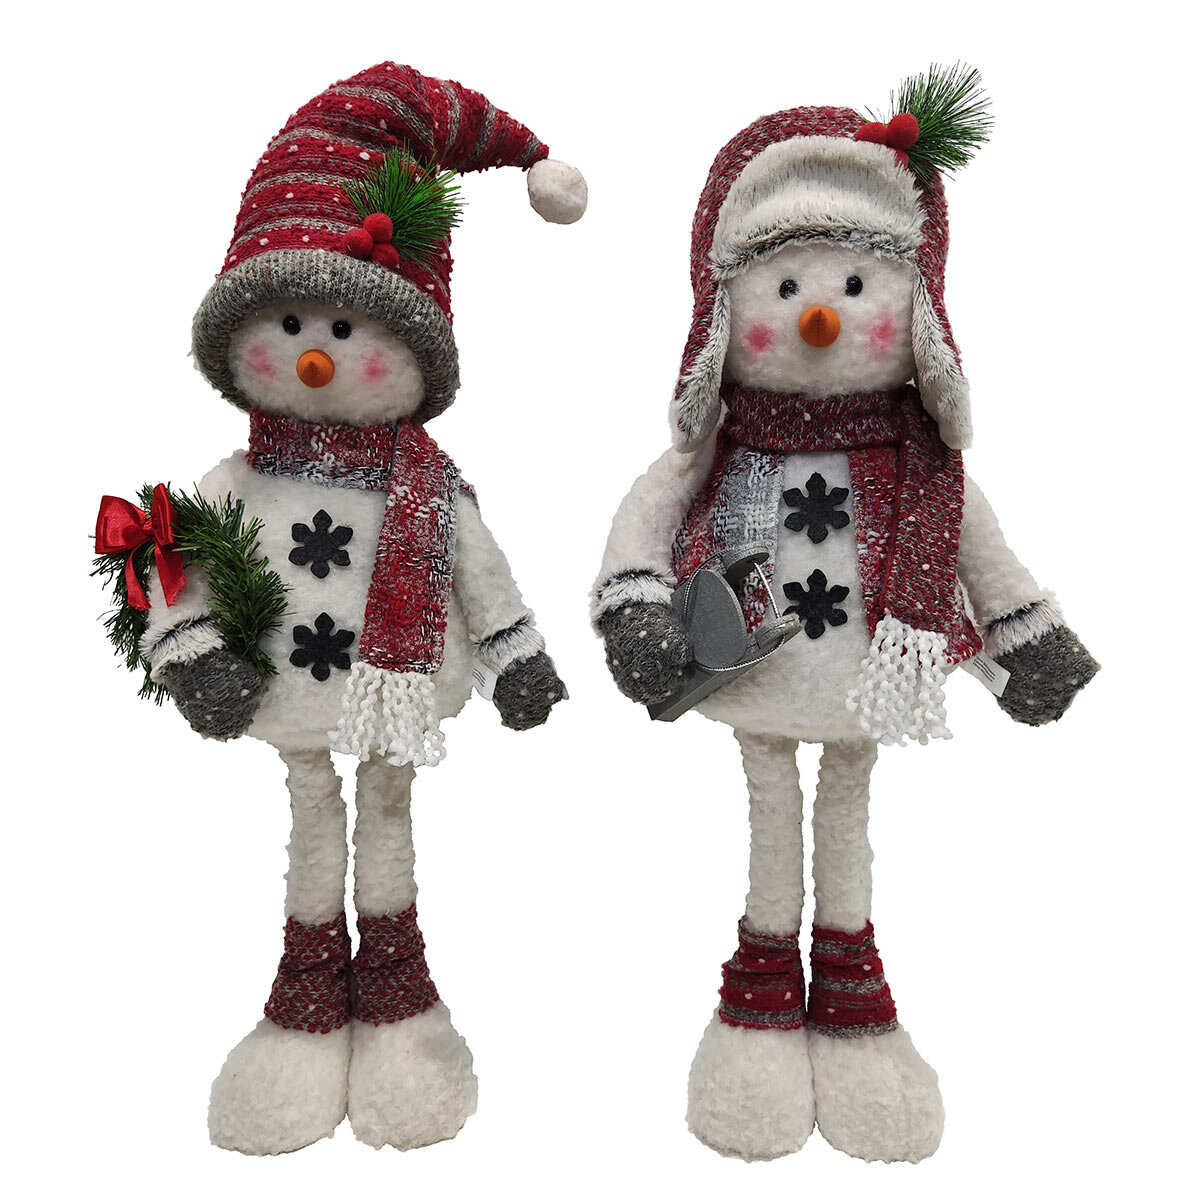 Buy Plush Snowmen Overview2 Image at Costco.co.uk